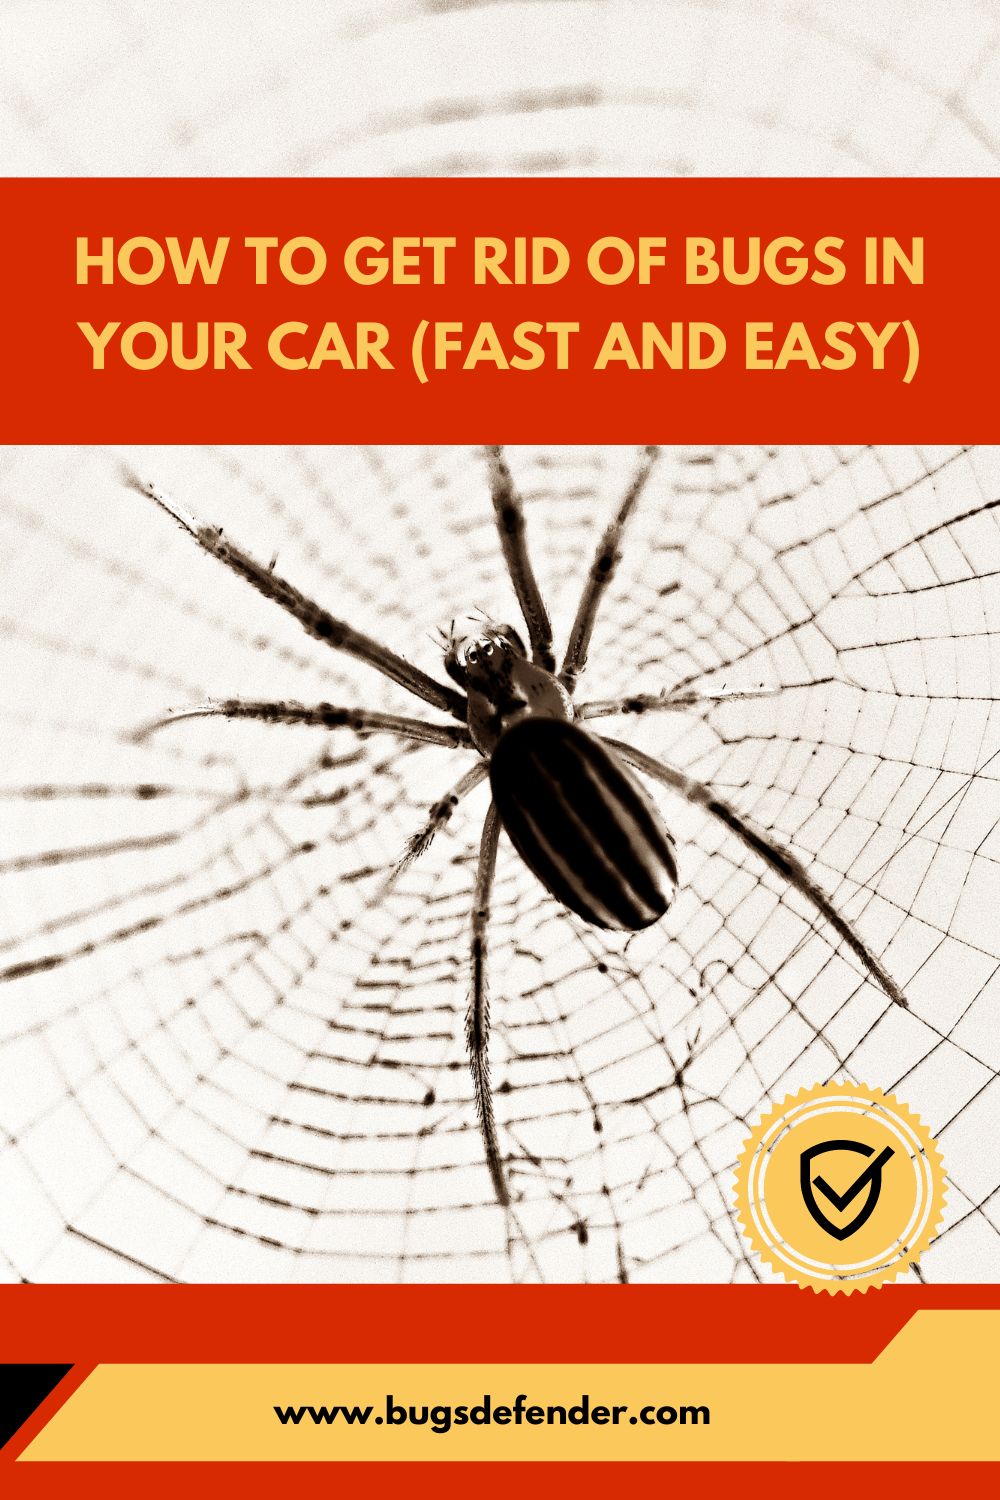 How To Get Rid Of Bugs In Your Car pin2